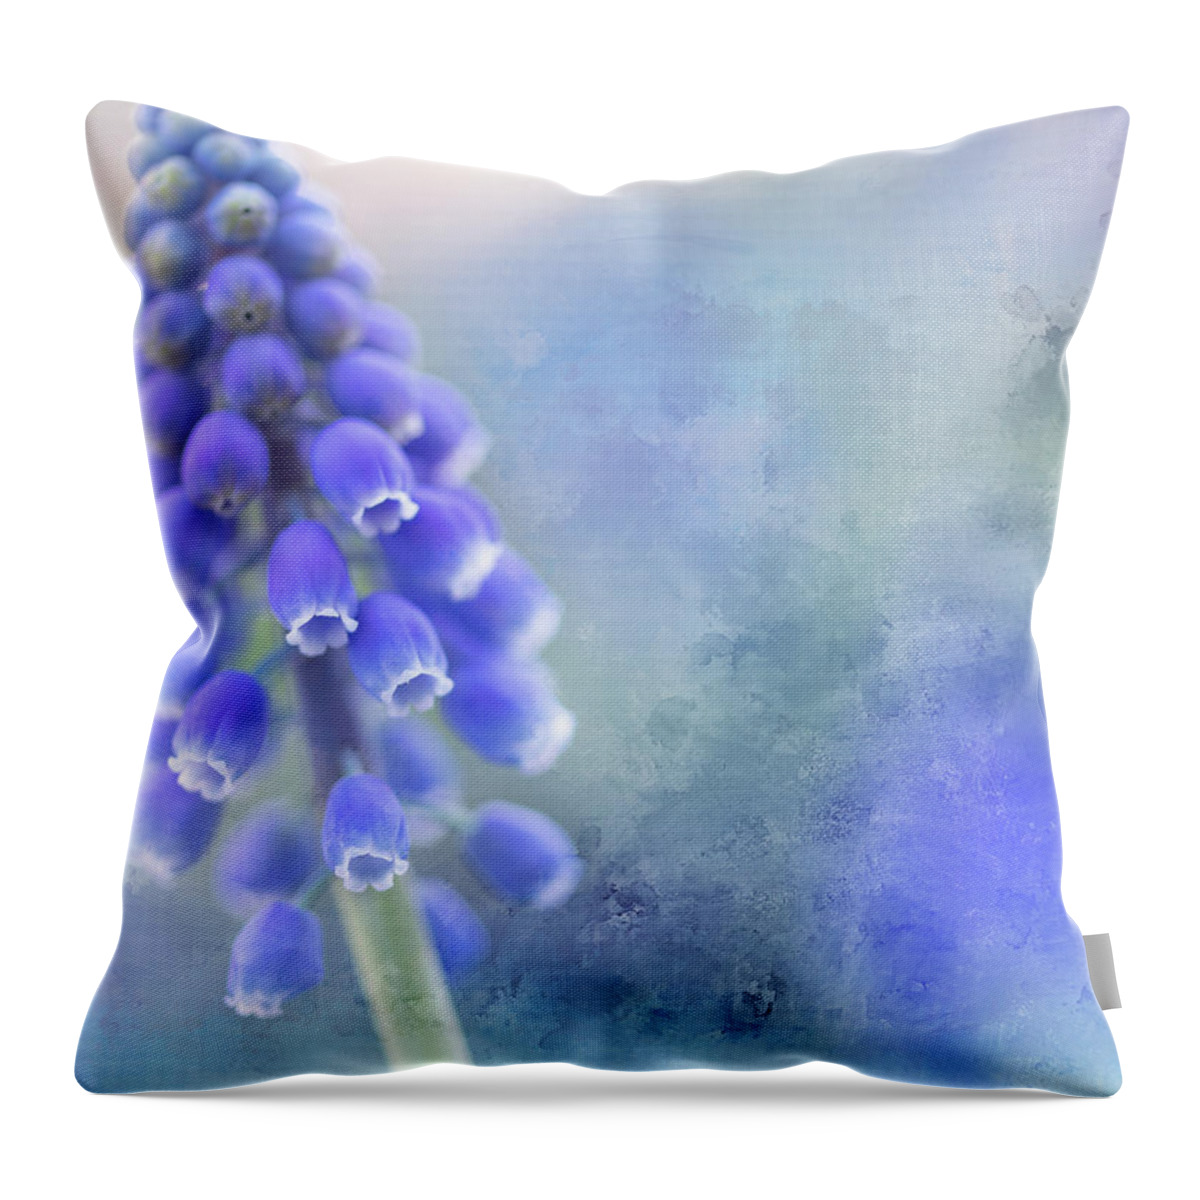 Hyacinth Throw Pillow featuring the photograph Grape Hyacinth 3 by Rebecca Cozart